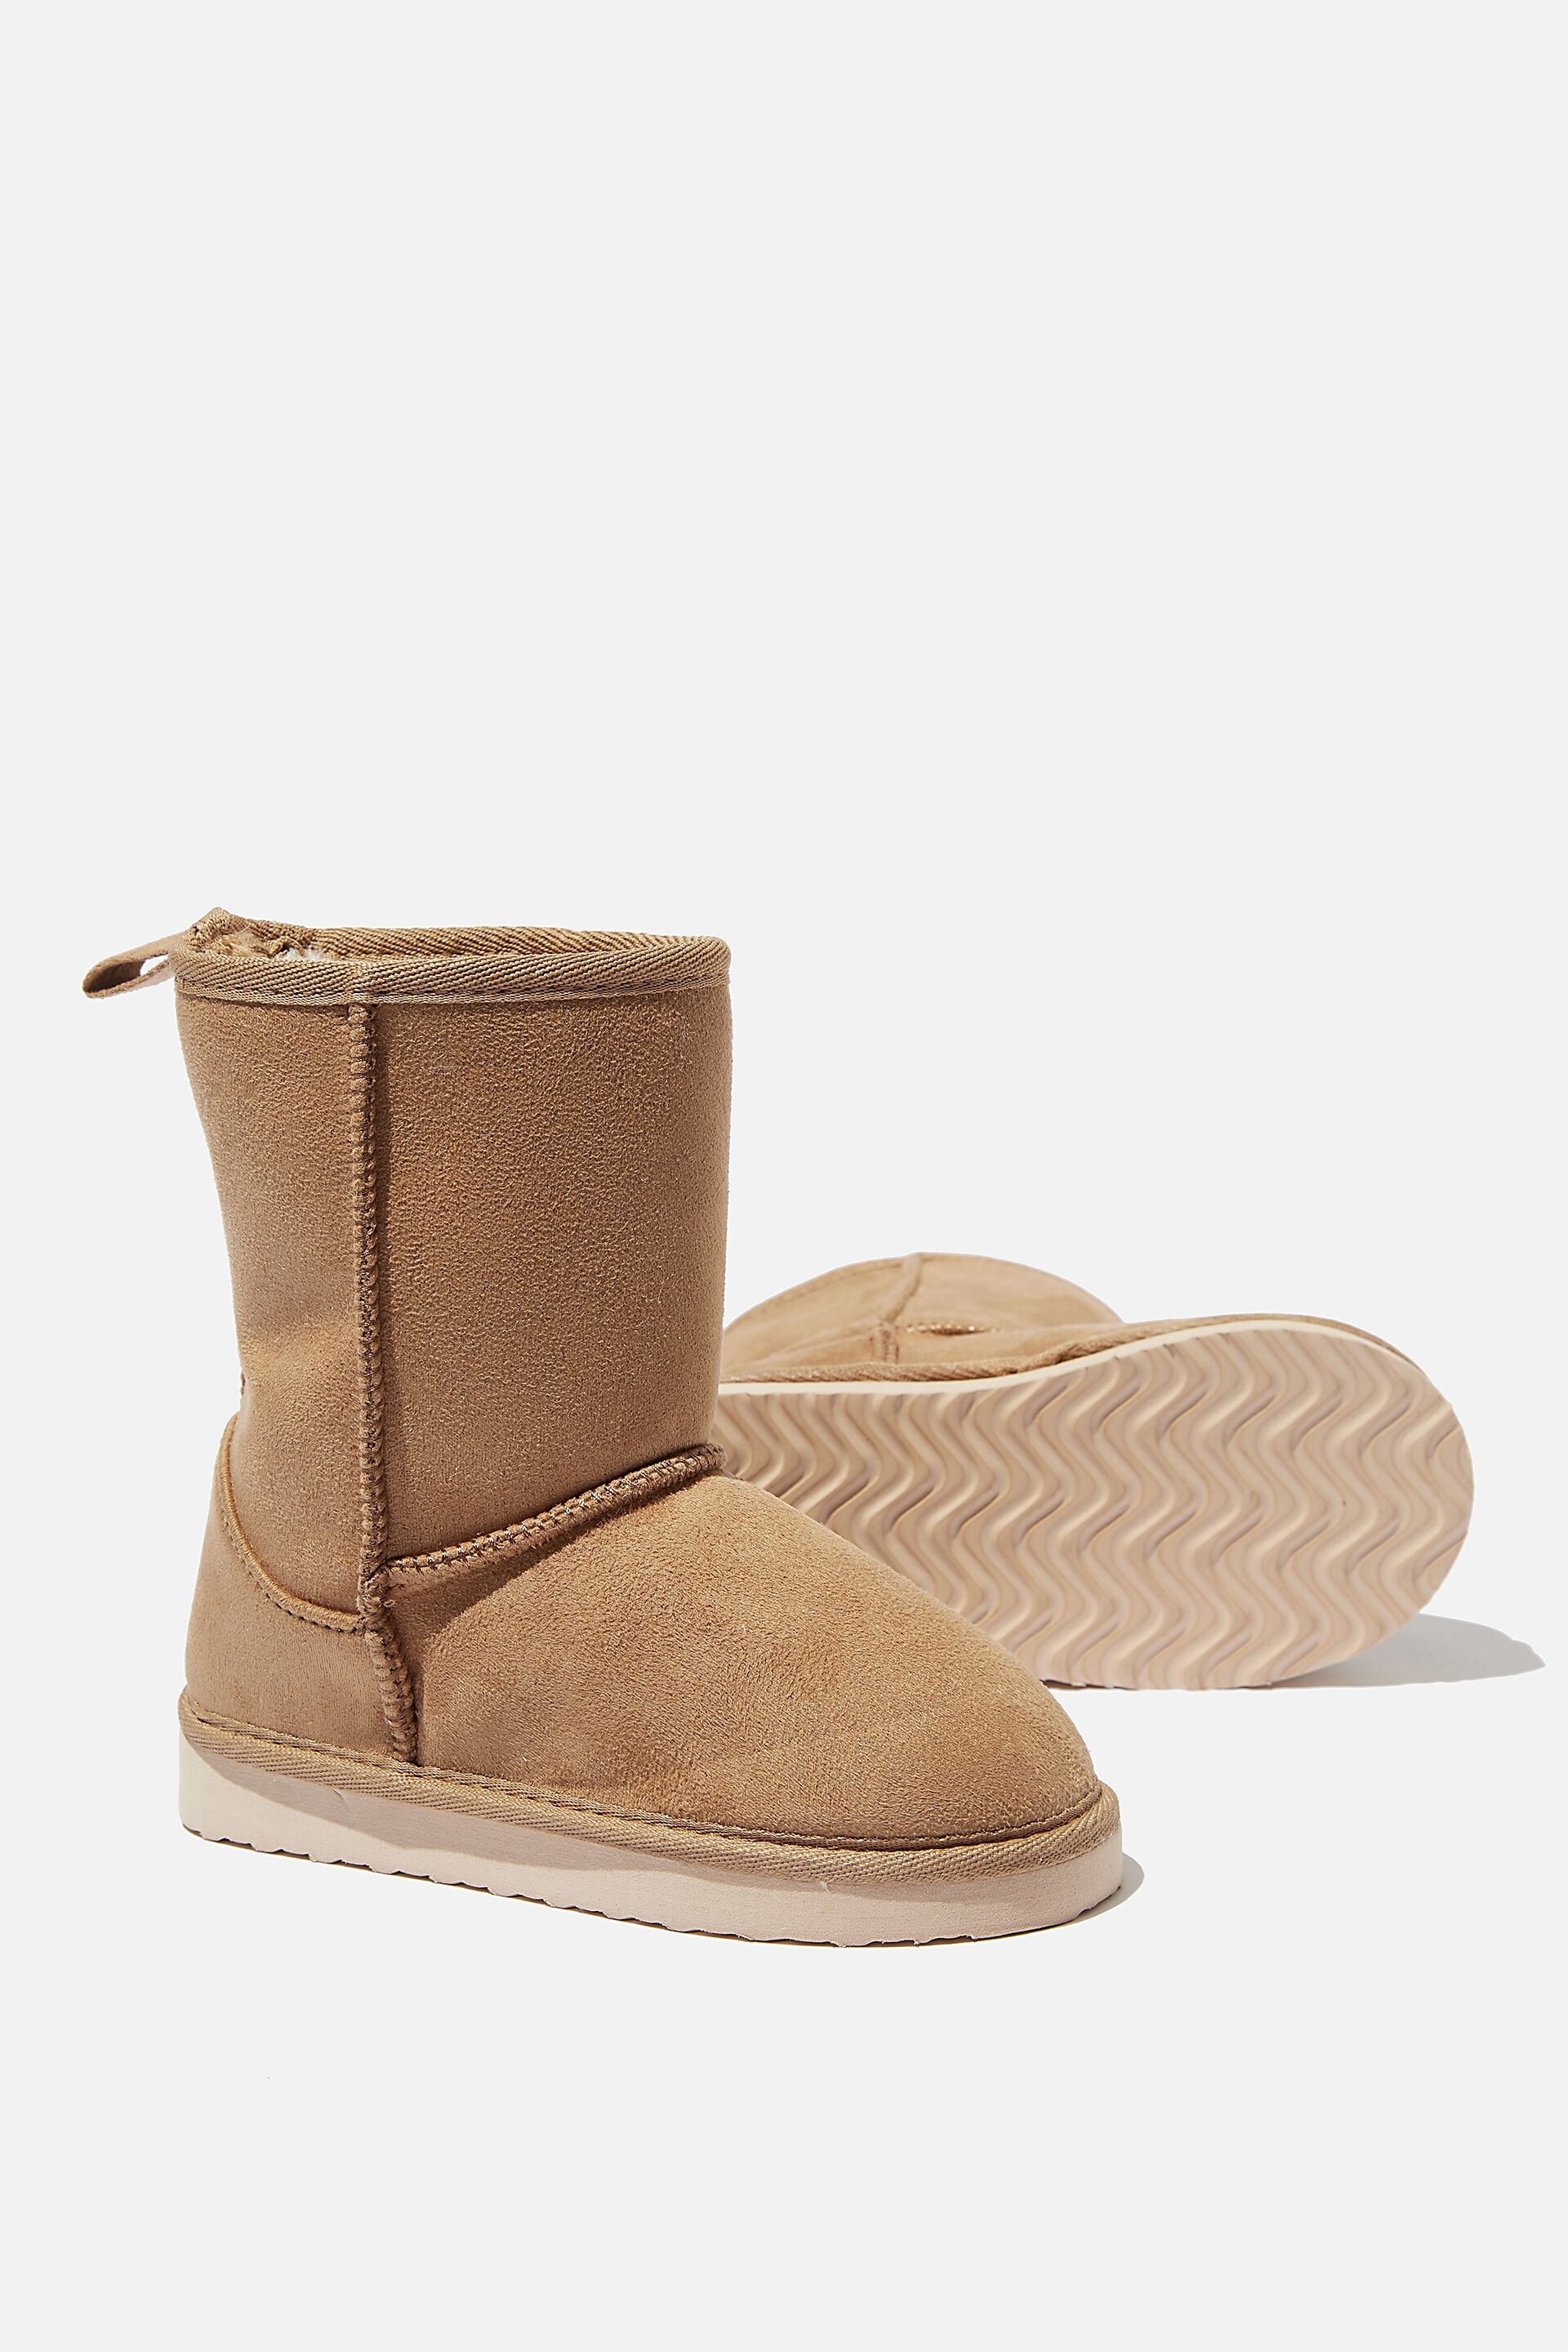 cotton on body ugg boots Cheaper Than 